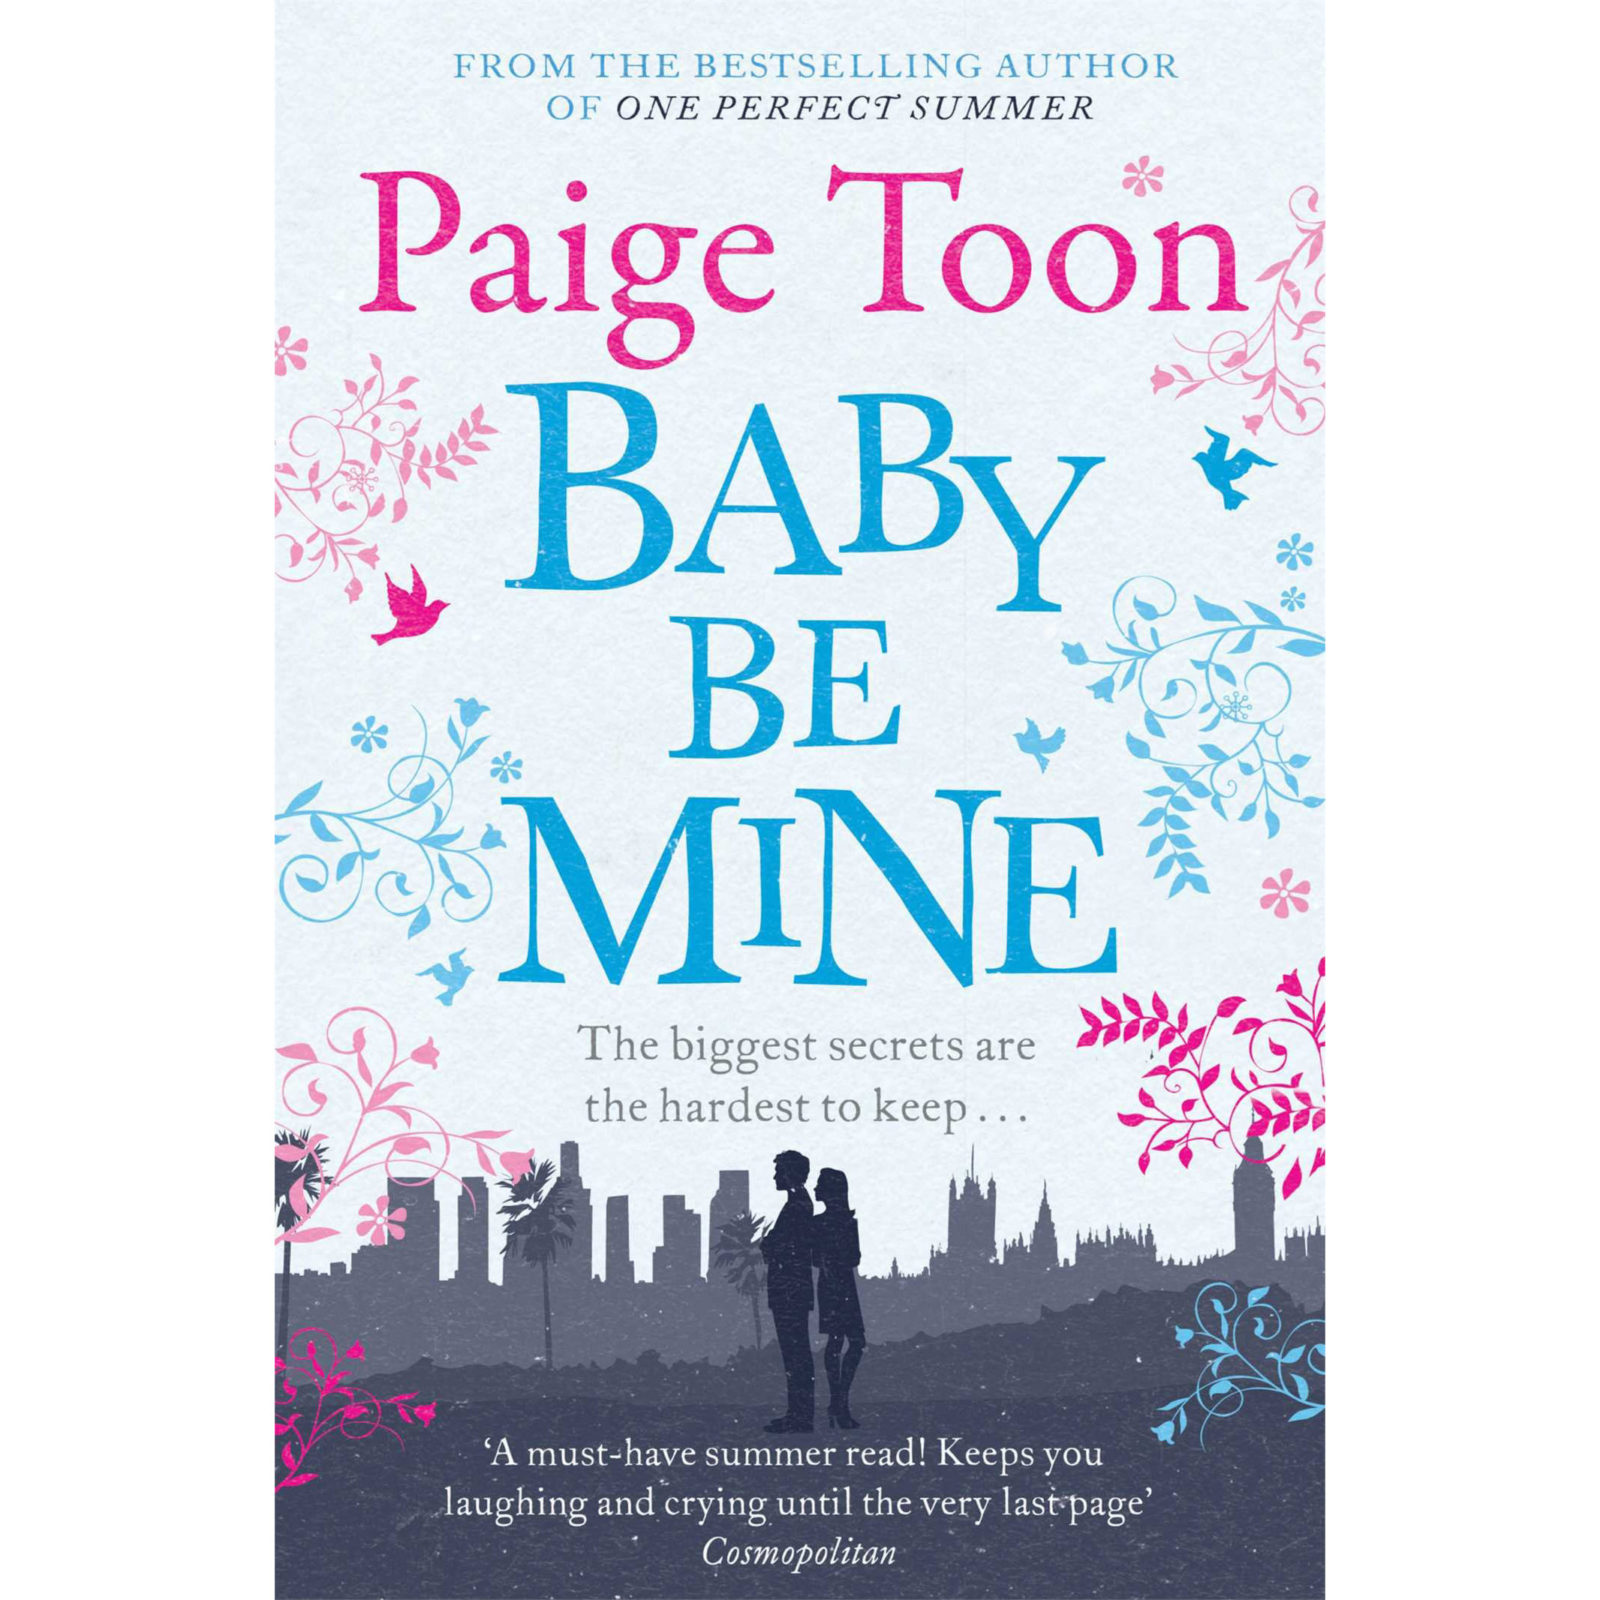 Johnny Be Good and Baby Be Mine by Paige Toon